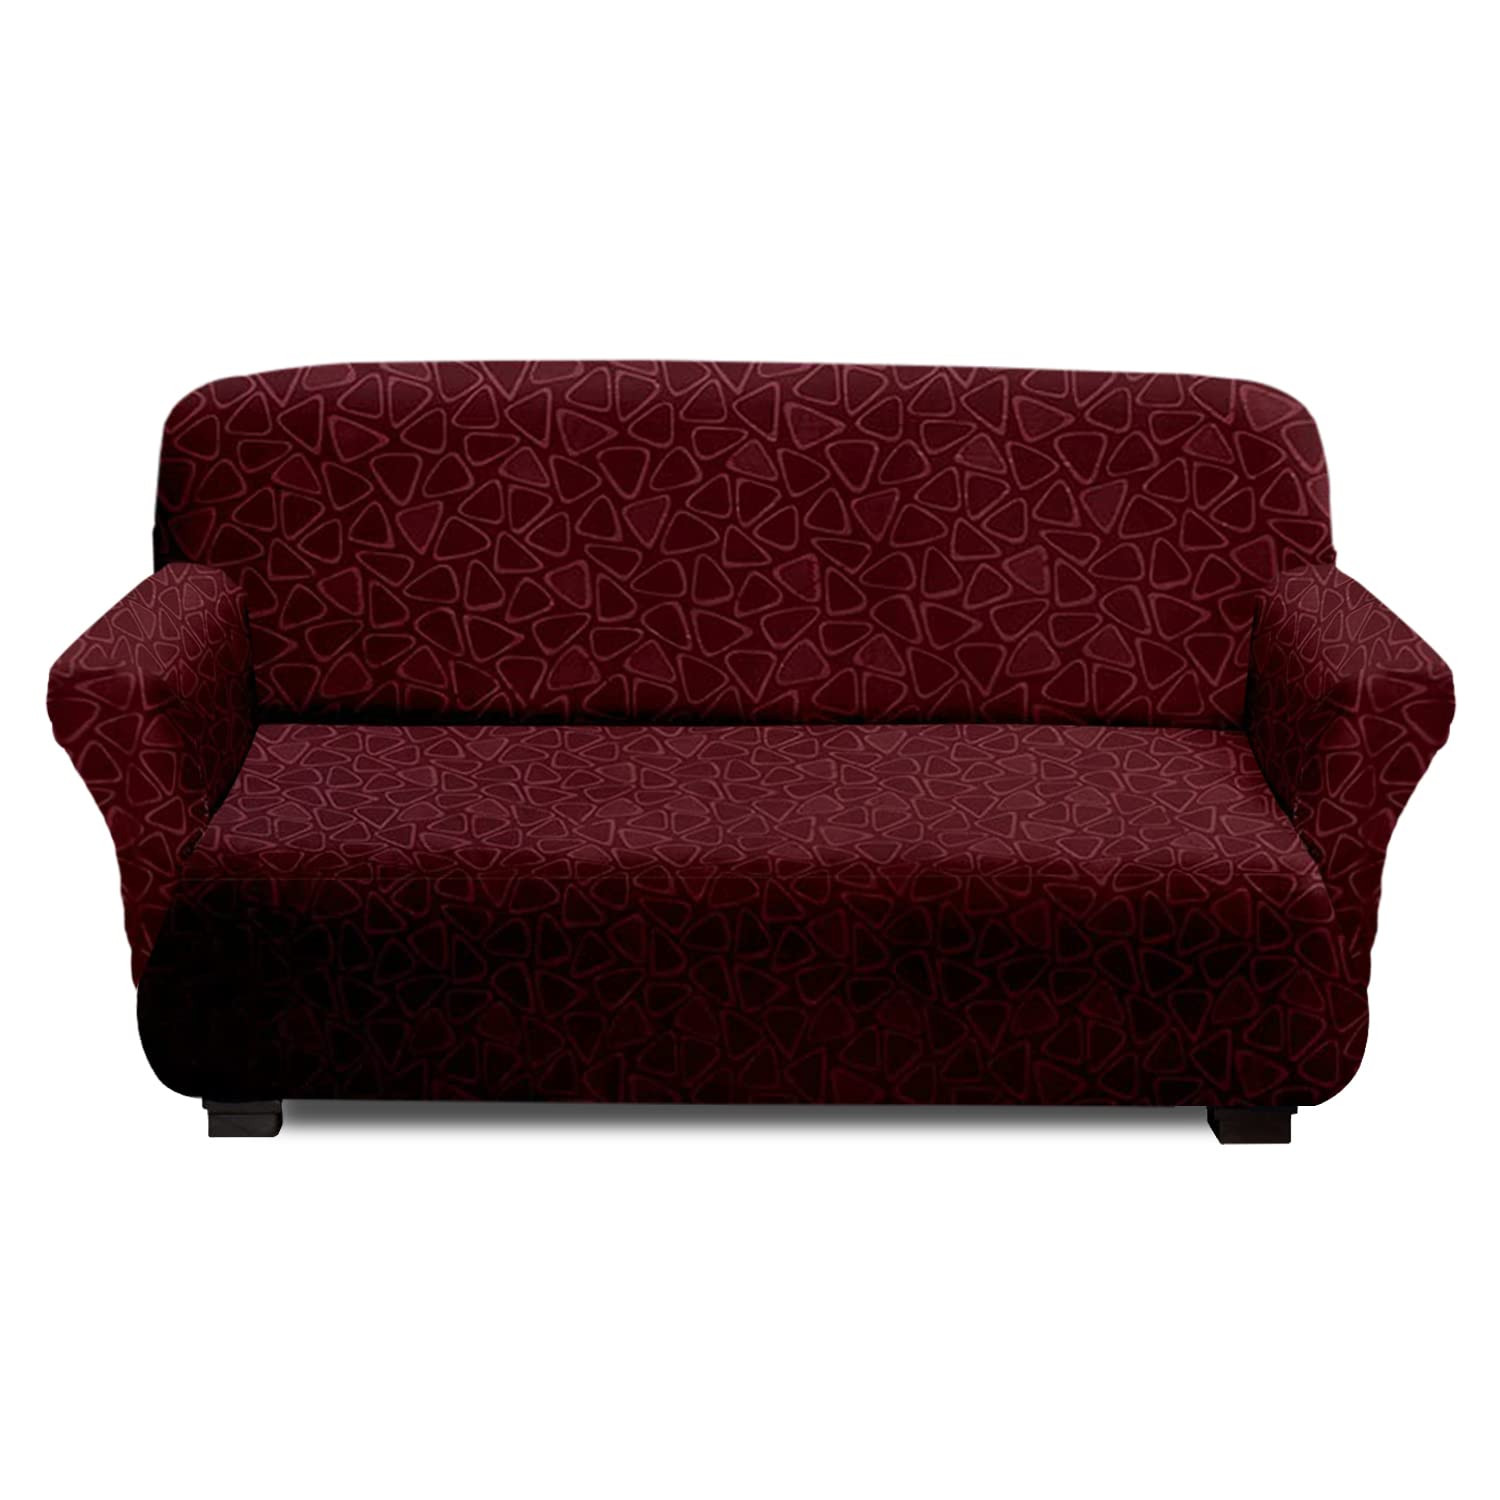 Kuber Industries Premium Two-Seater Comfort Sofa Cover|Triangle Design Polyester Couch Cover|Stretchy Sofa Slipcovers With Foam Sticks (Maroon)